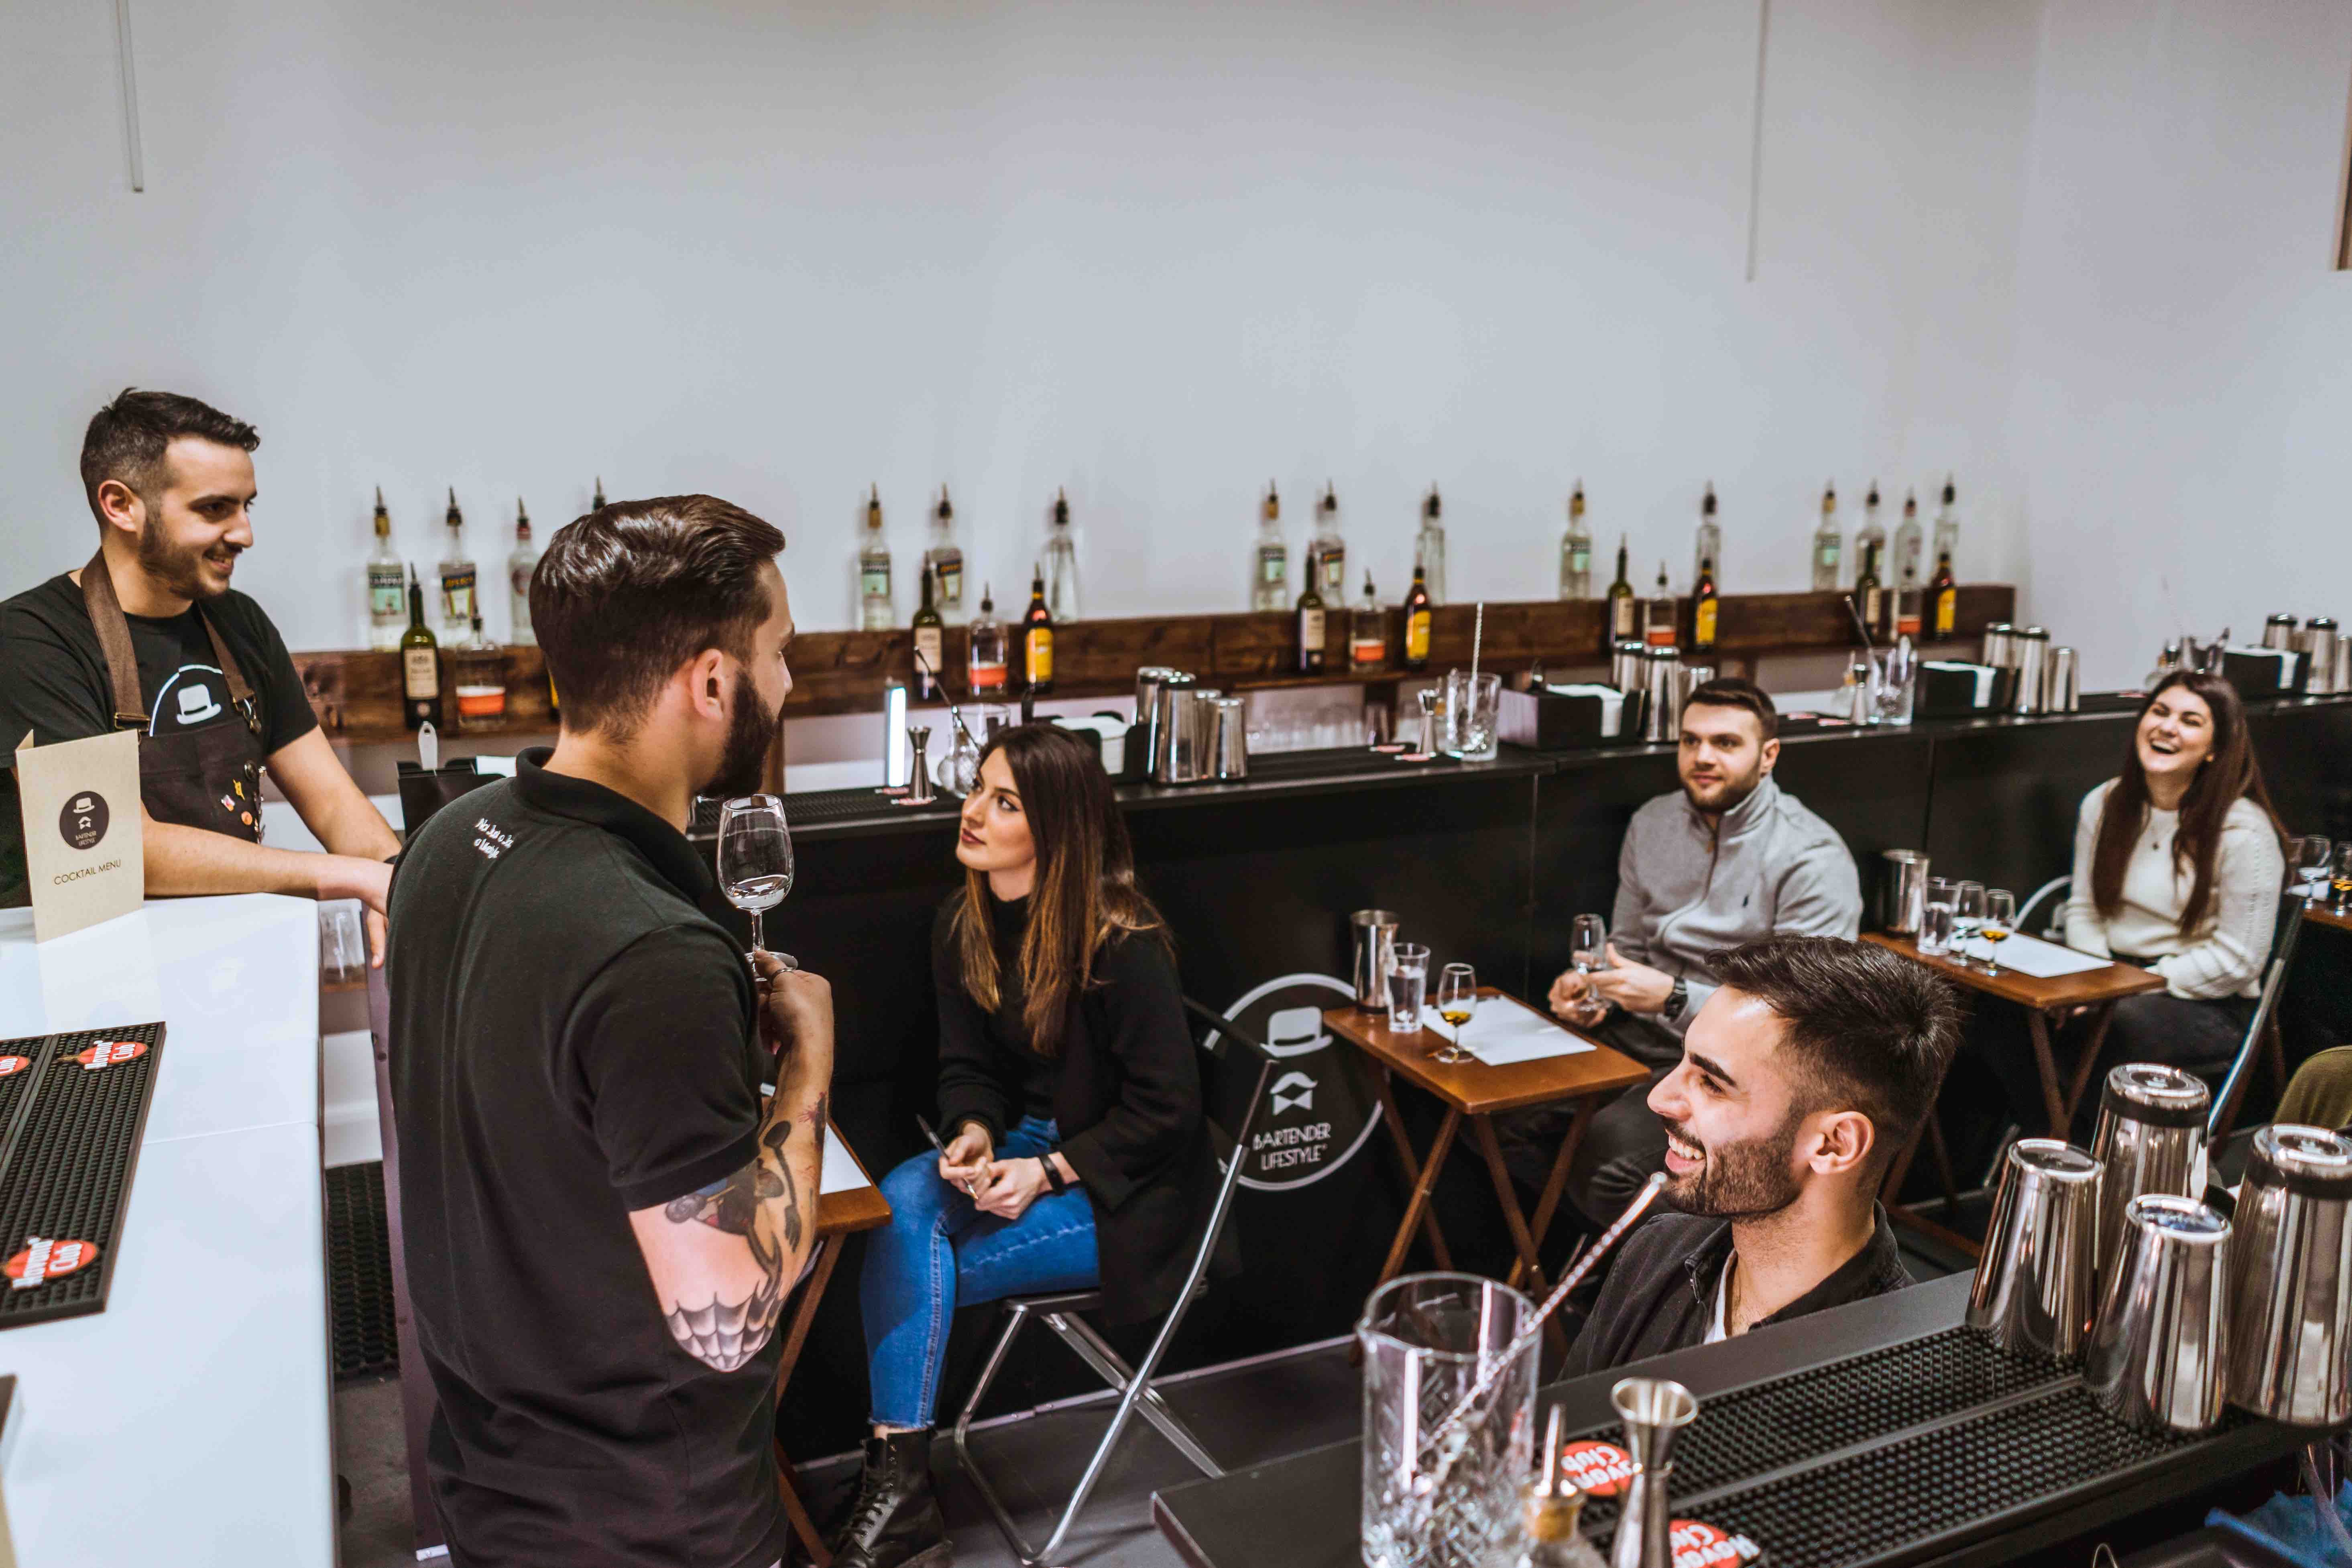 WSET training session at the academy during the professional bartender course